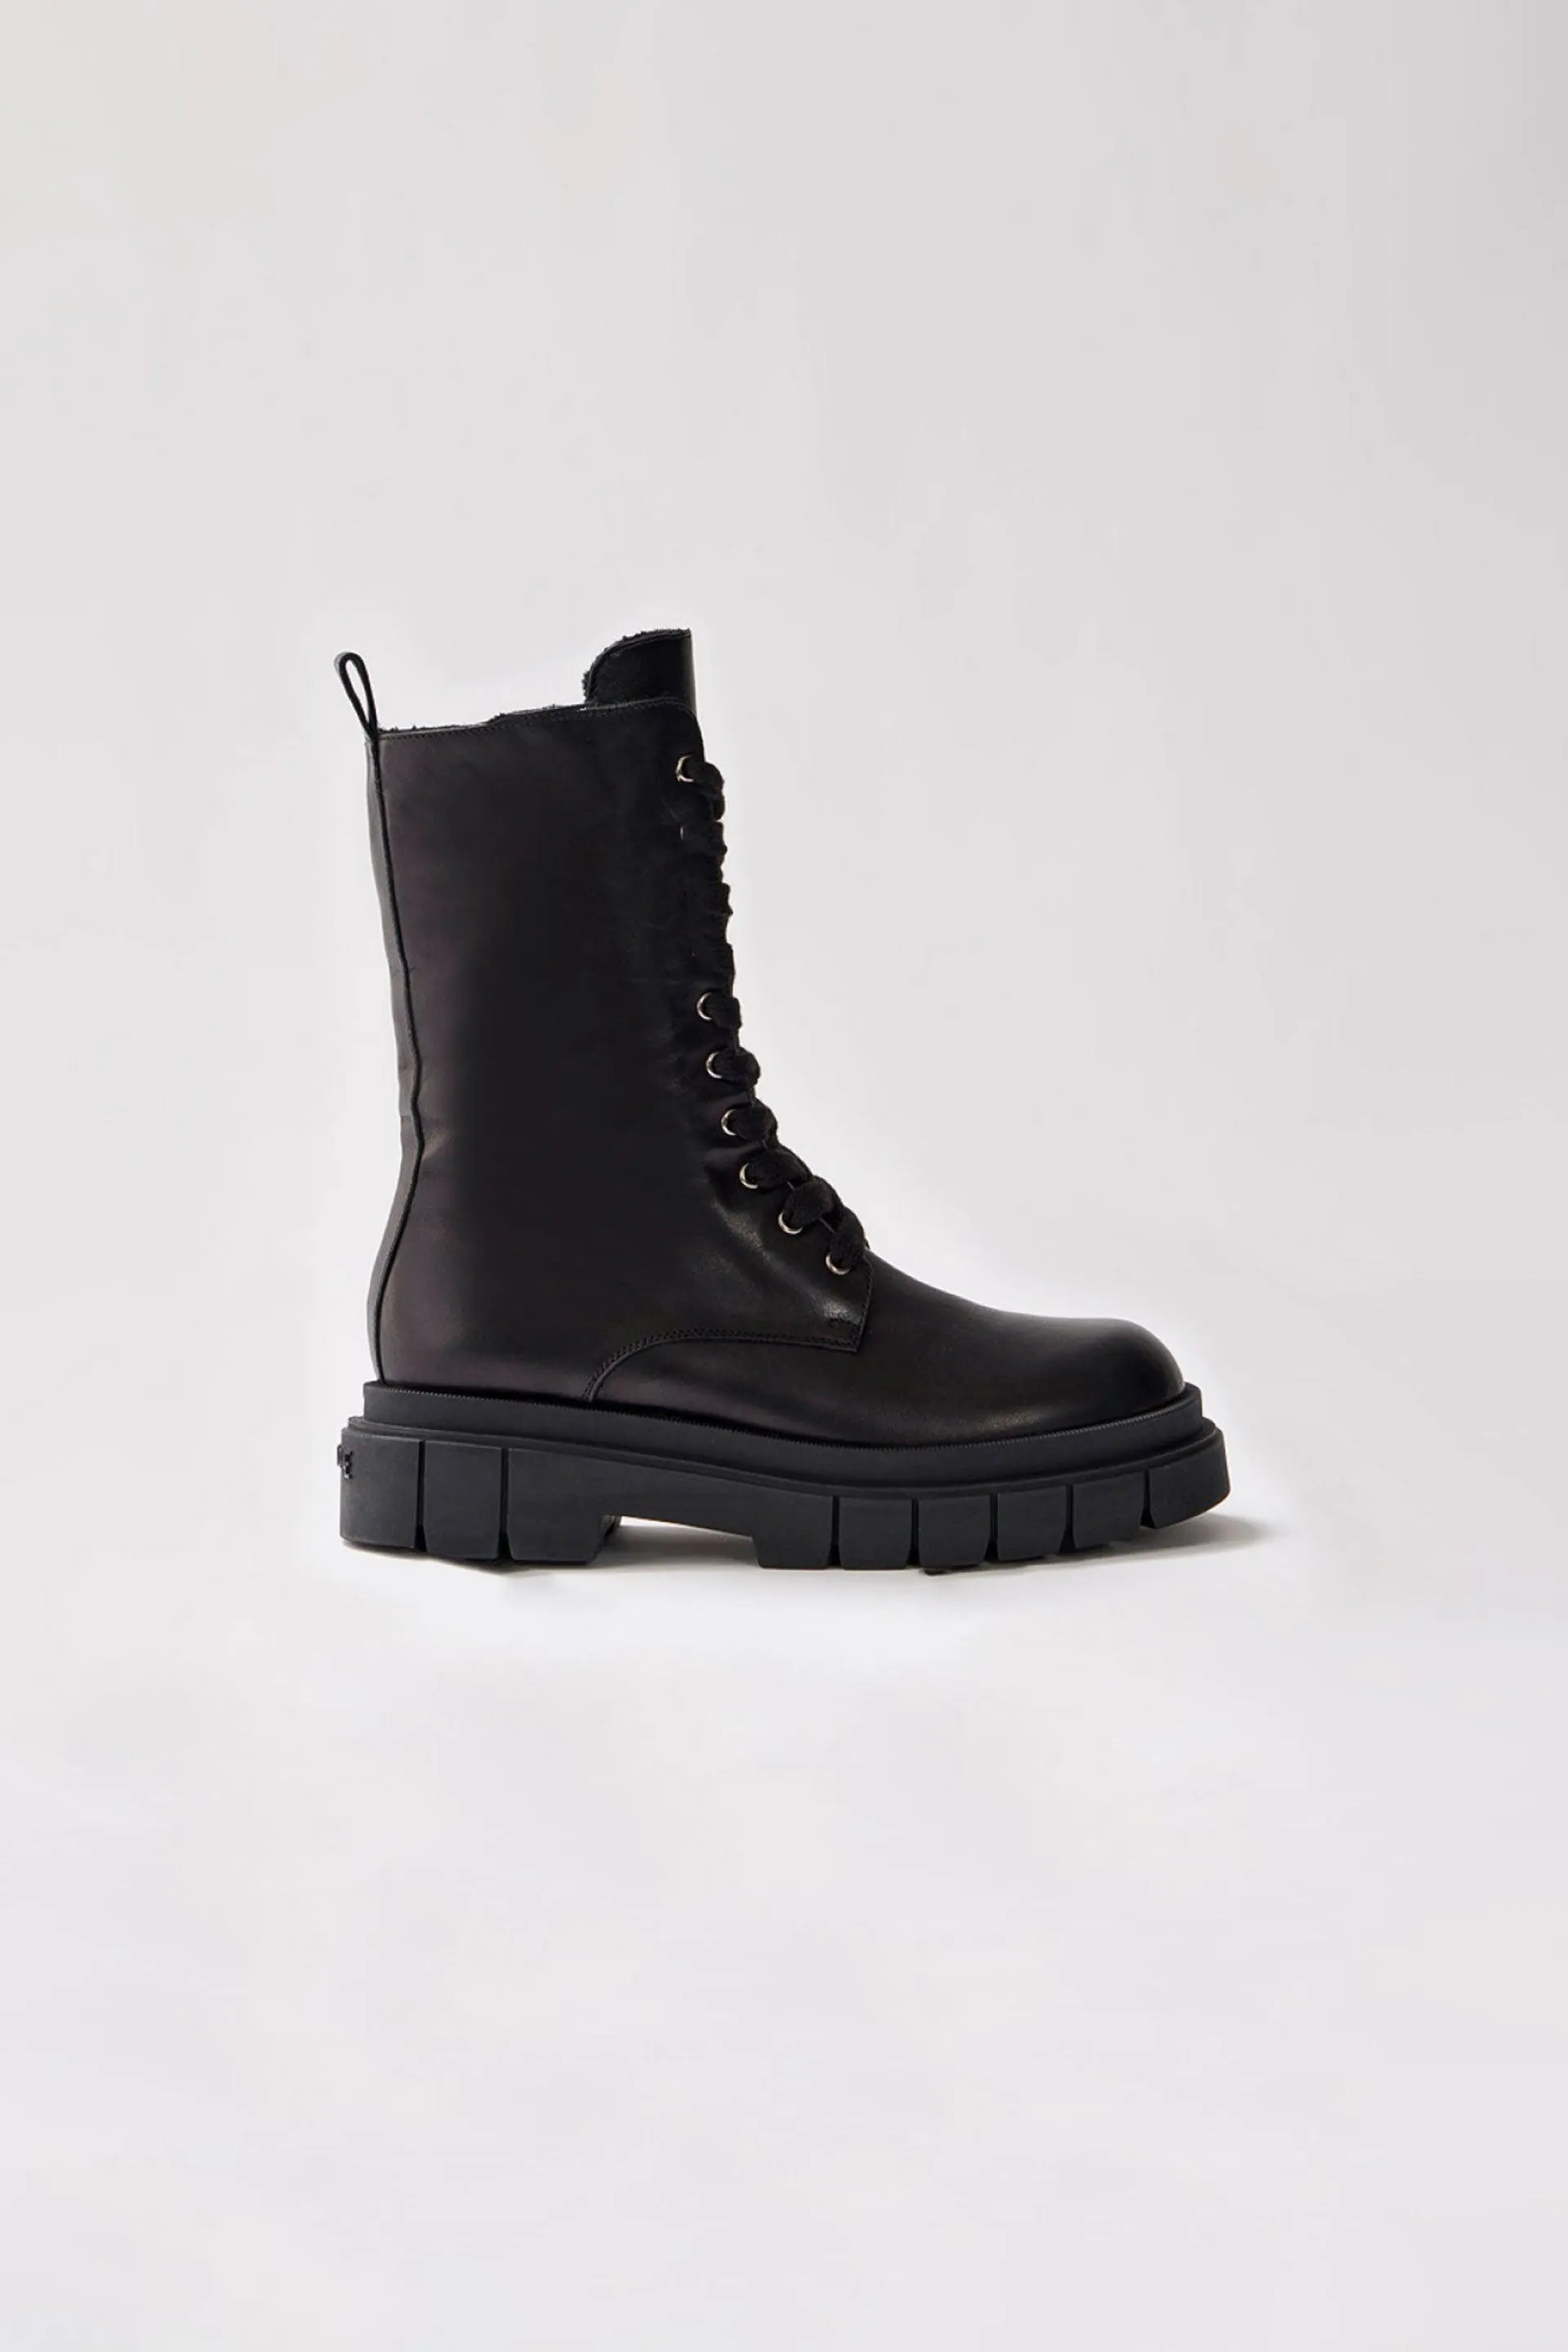 WARRIOR Lug sole leather combat boot